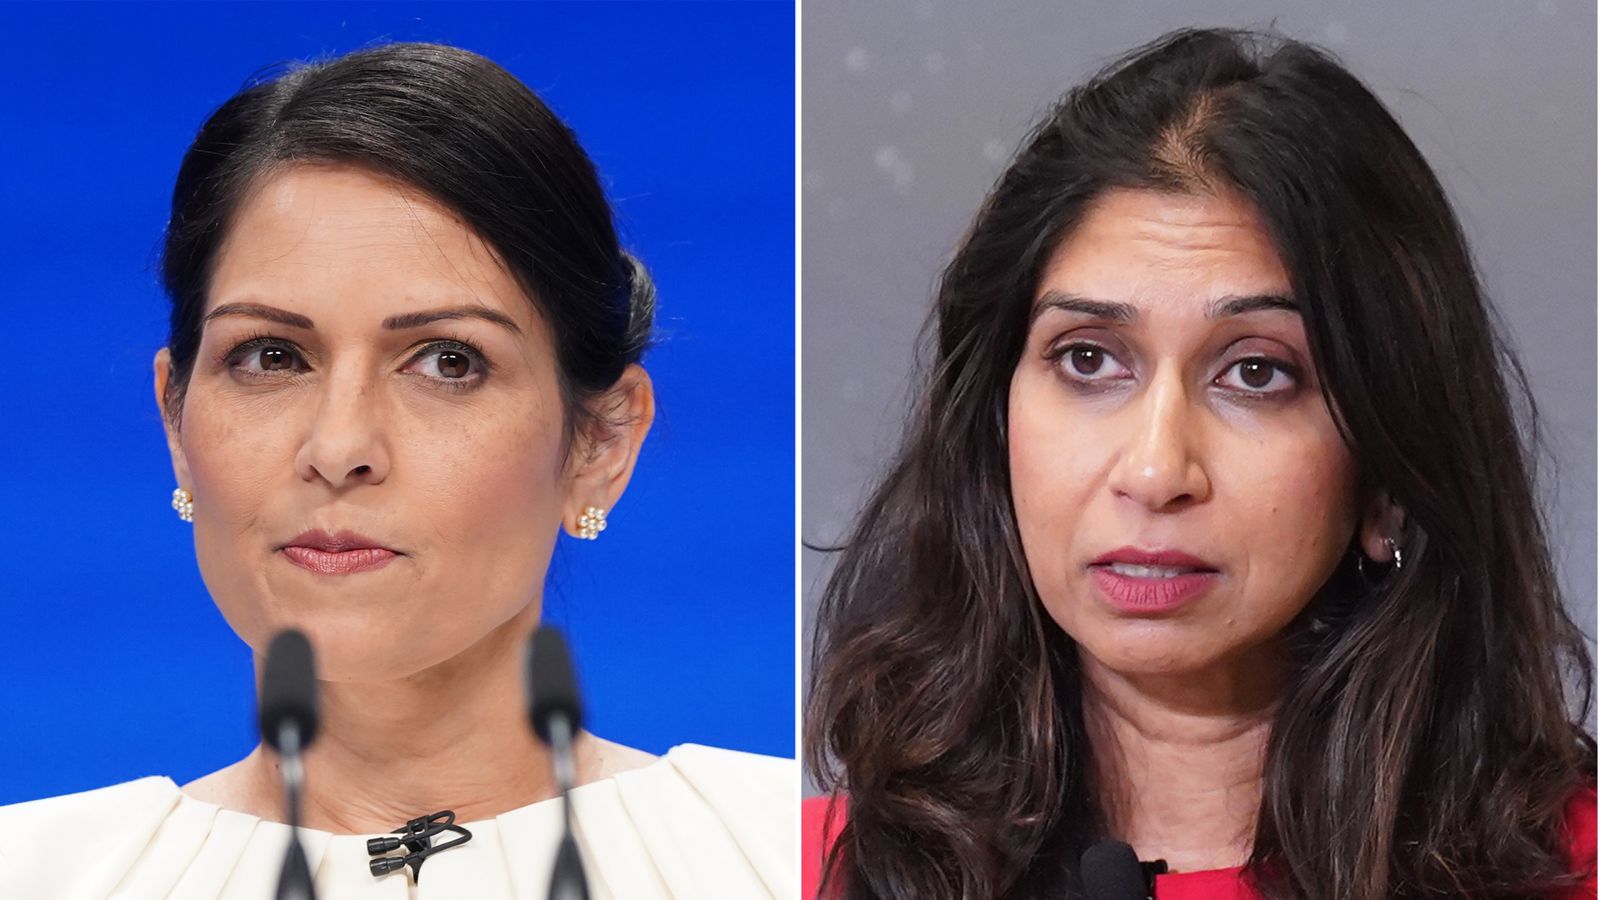 Priti Patel takes aim at Suella Braverman as she says multiculturalism speech may have been made 'to get attention'